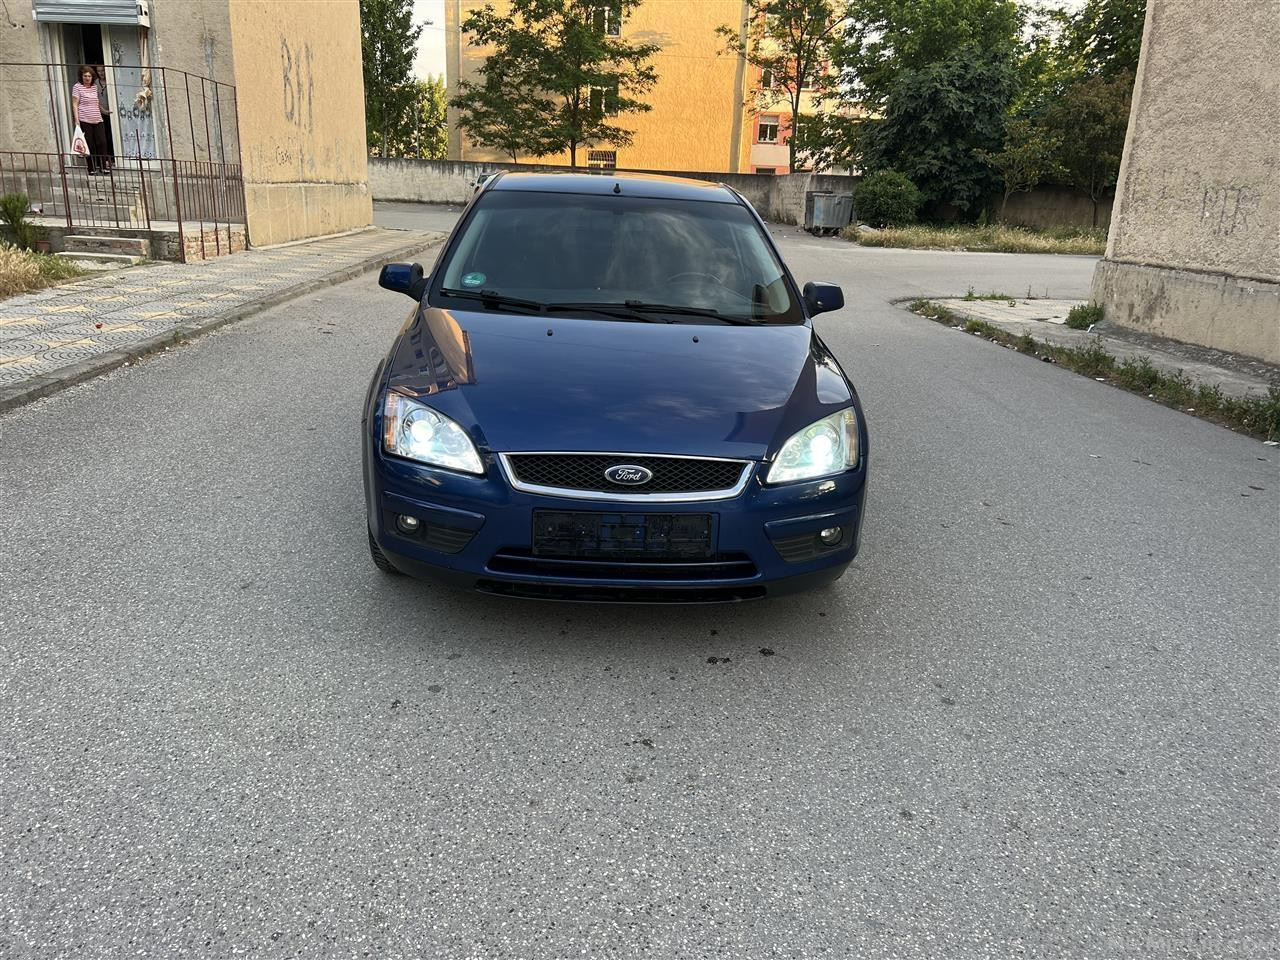 Ford Focus 1.6 Nafte 2007